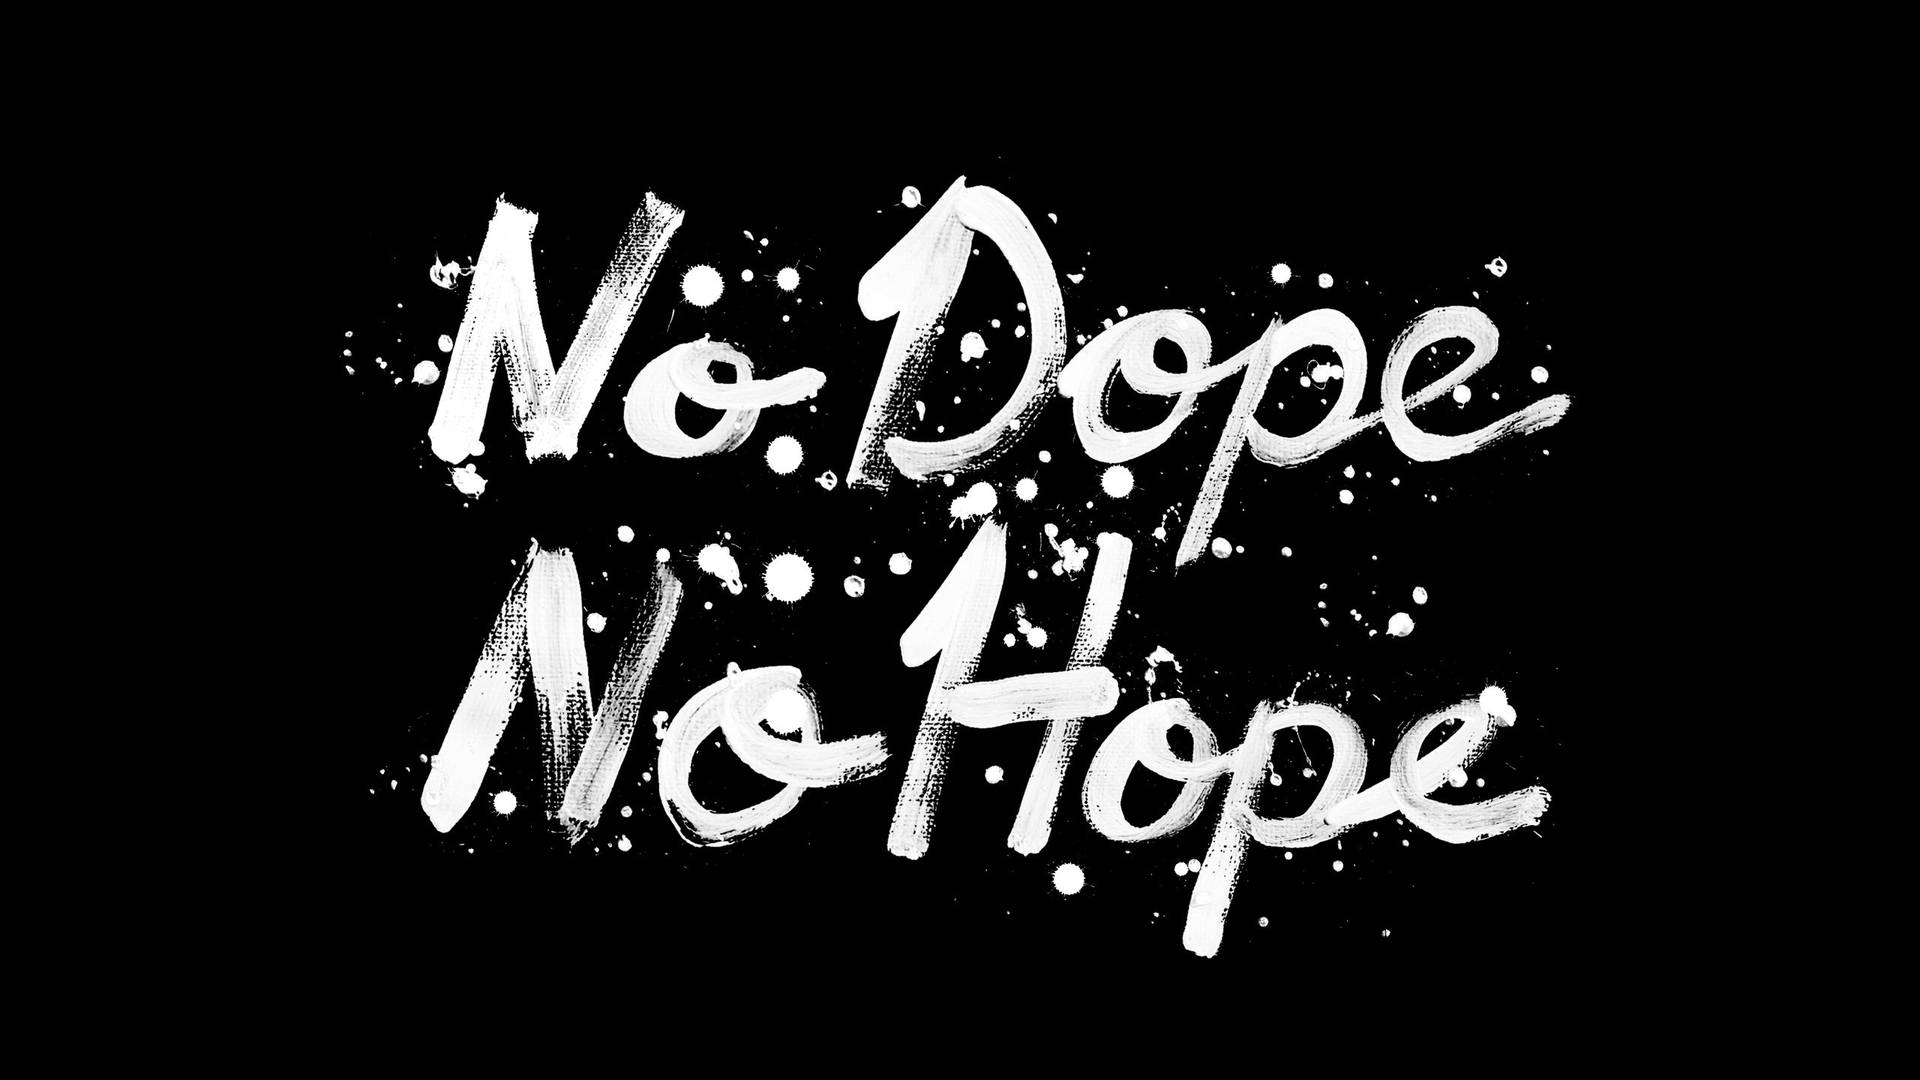 Free Dope Wallpaper Downloads, [200+] Dope Wallpapers for FREE | Wallpapers .com